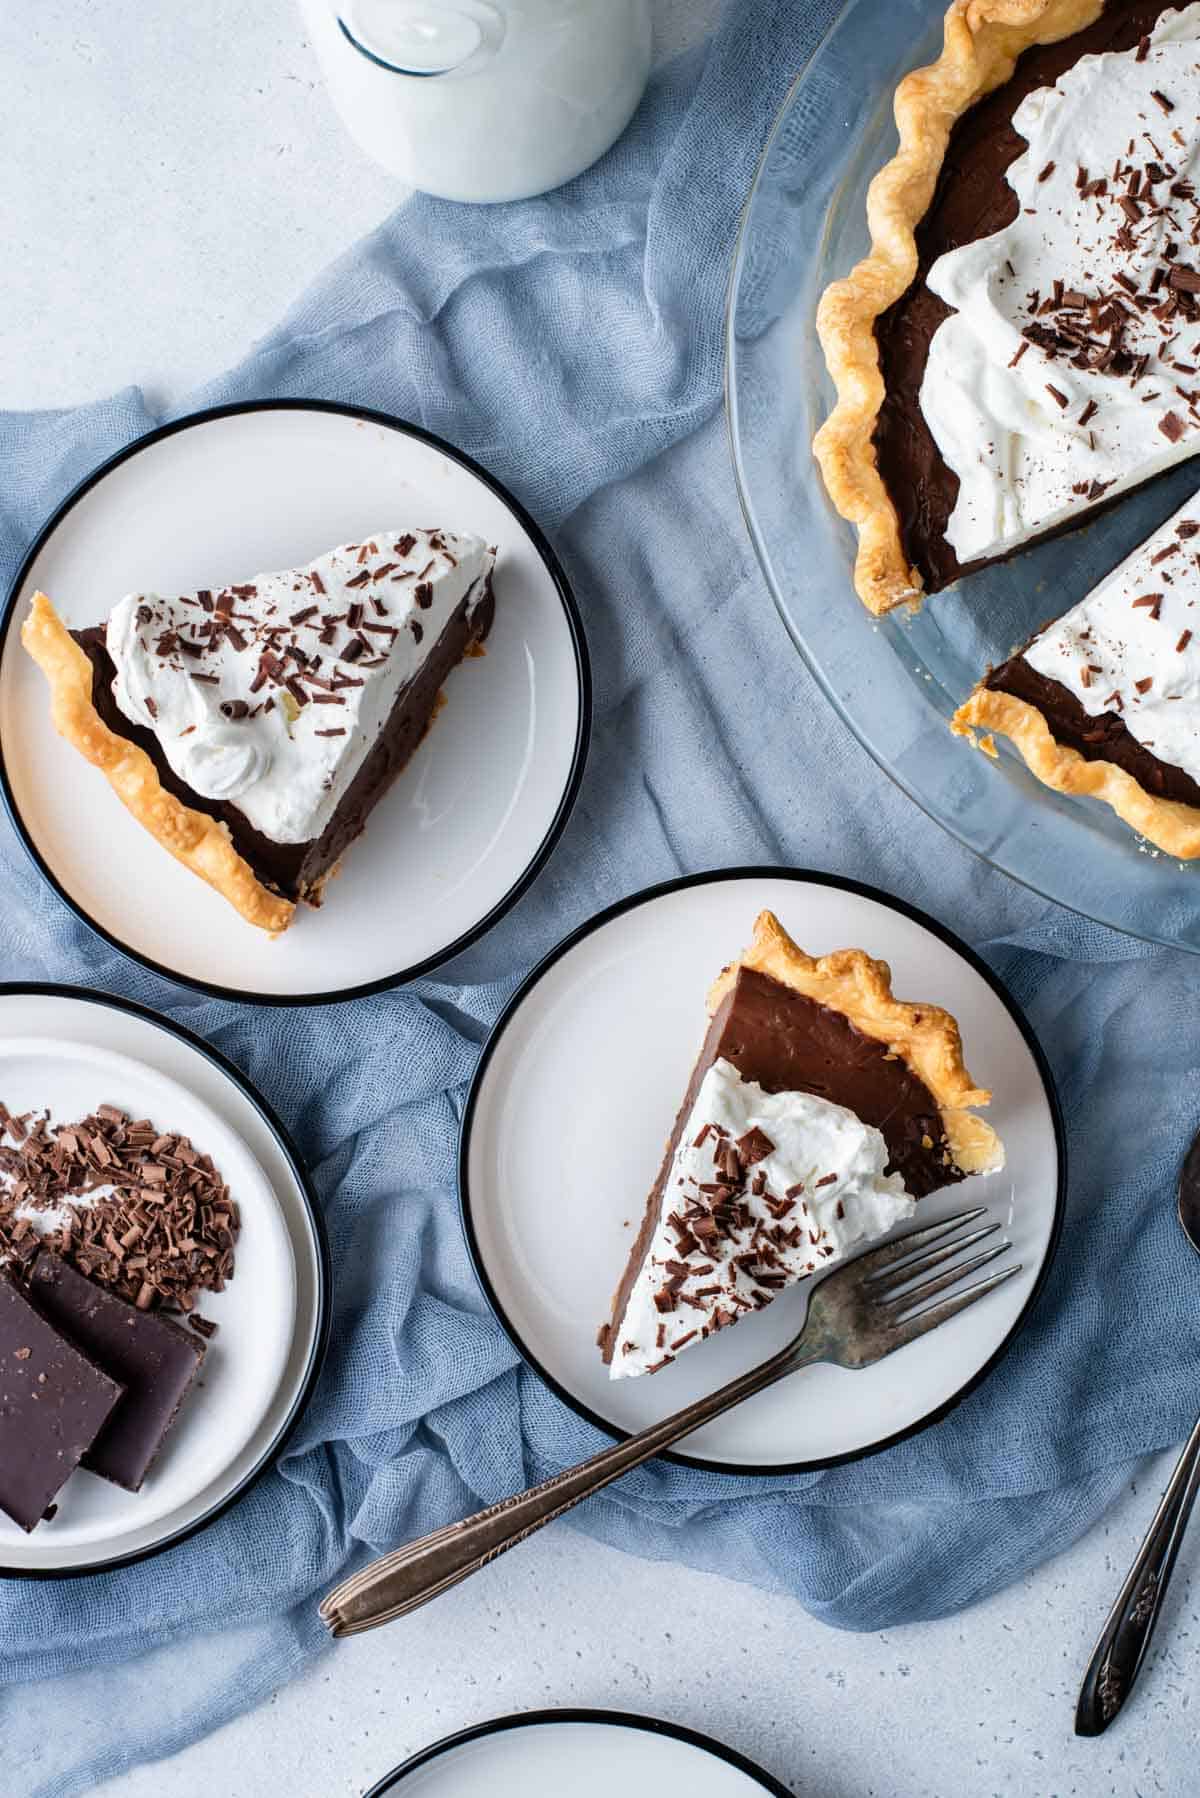 overheard view of a spread of chocolate pie with a glass pie dish with pie slices in it, two small white plates with pie slices on them and a white bowl of chocolate shavings, all sitting on a blue towel